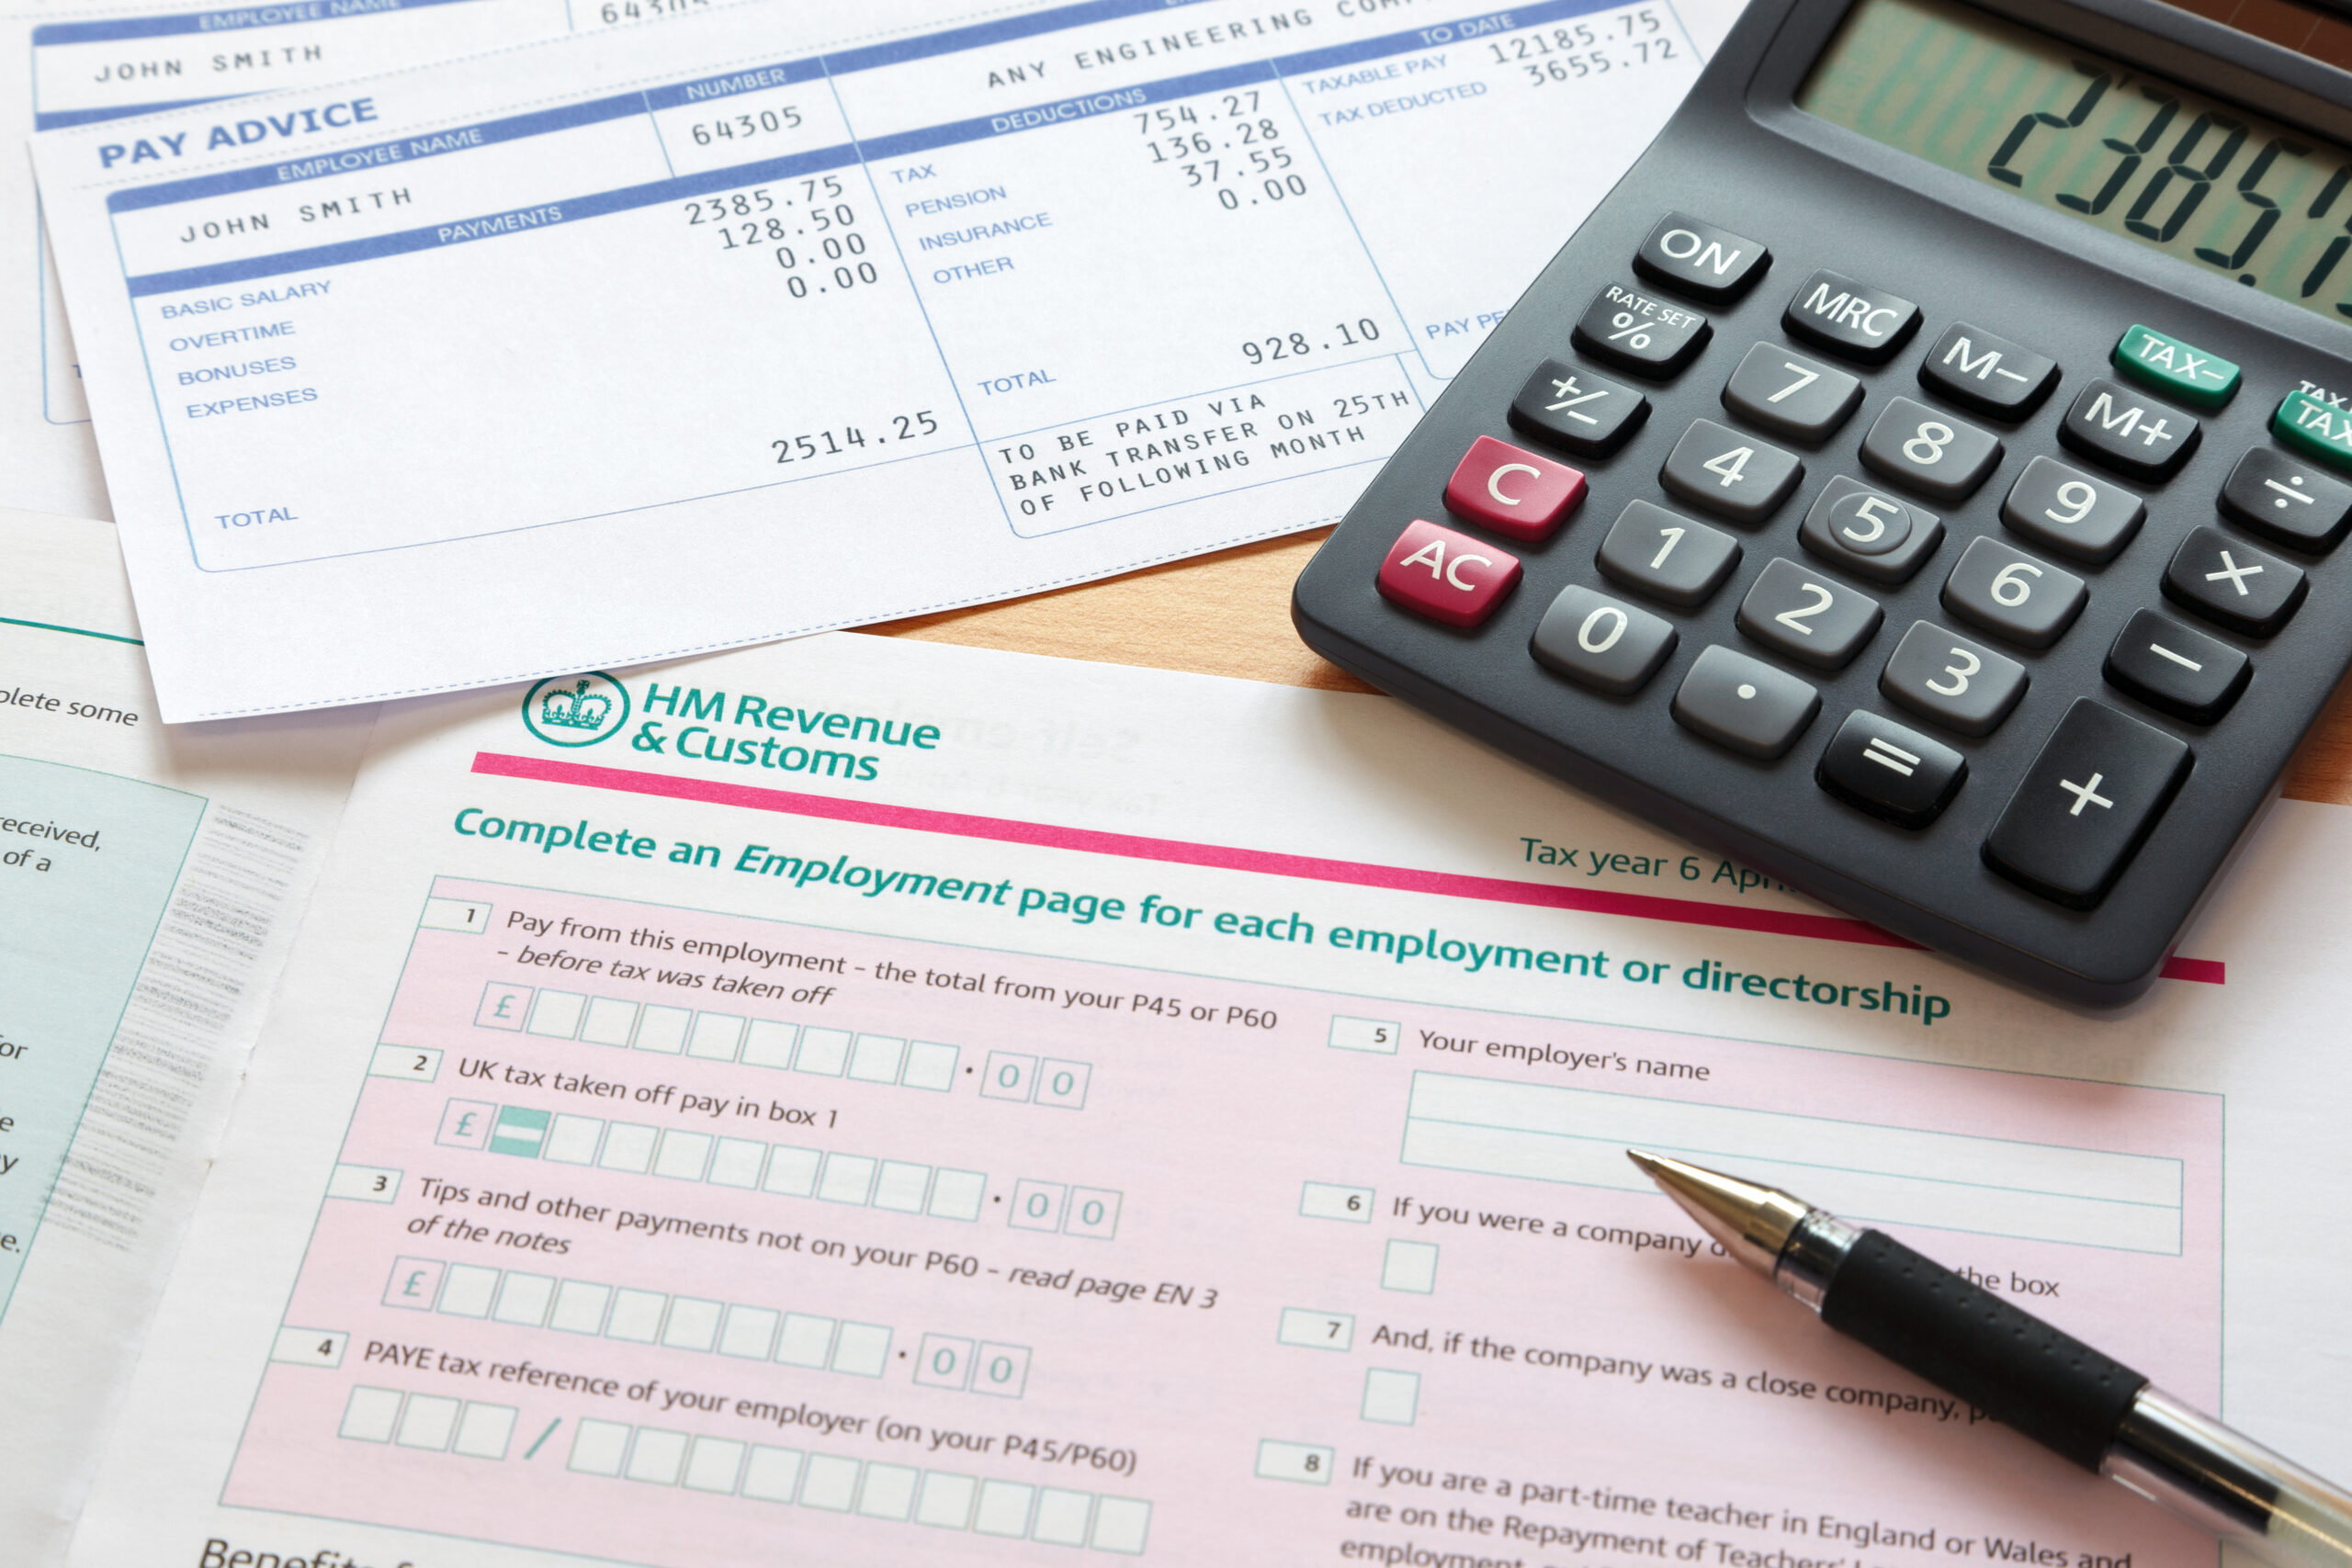 Photo of a UK self assessment tax return with calculator and payslips. The payslip is a mock up the names and all other information on it is fictional.